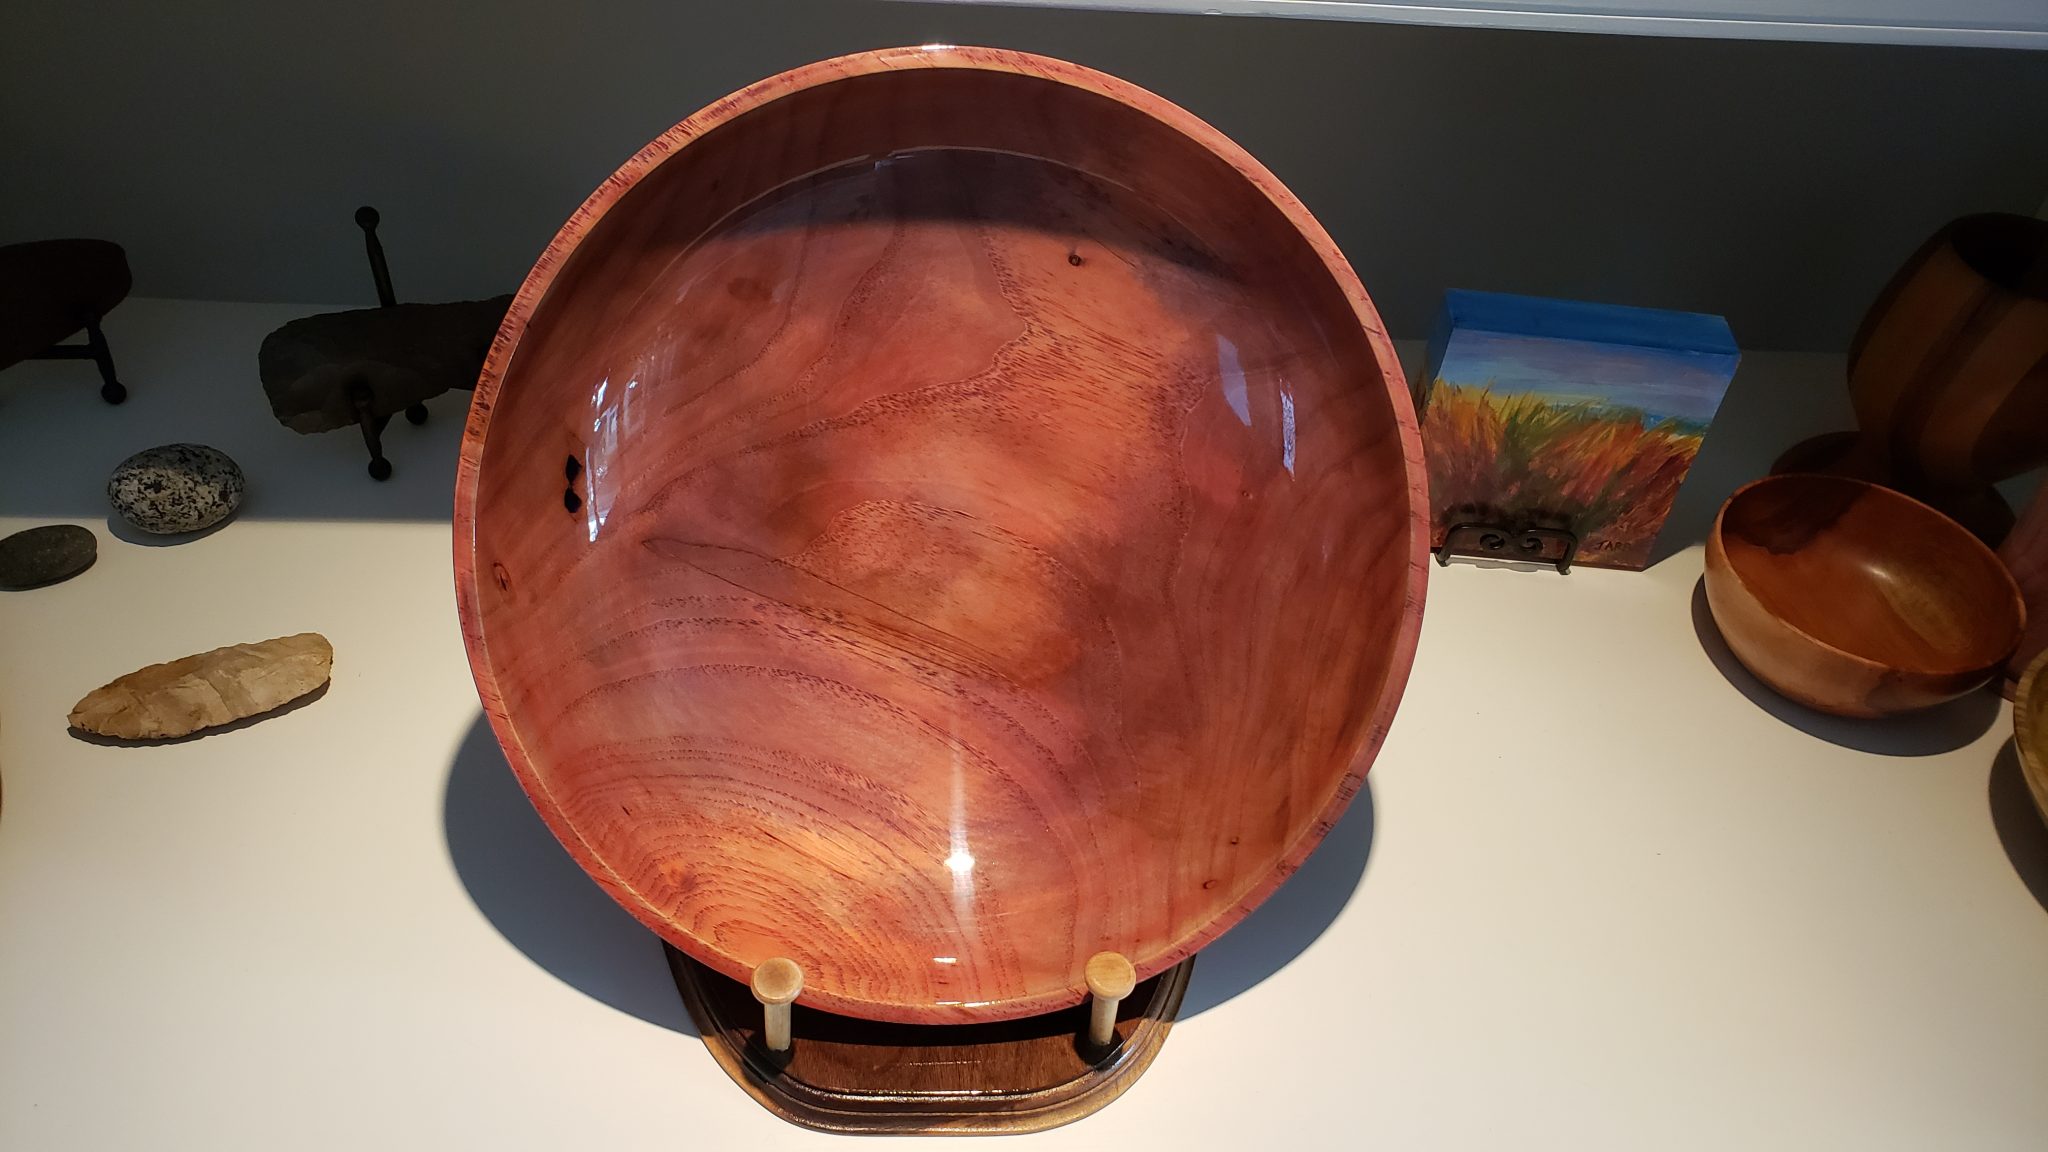 Pecan dyed blue, sanded back, epoxy dyed red, then poly